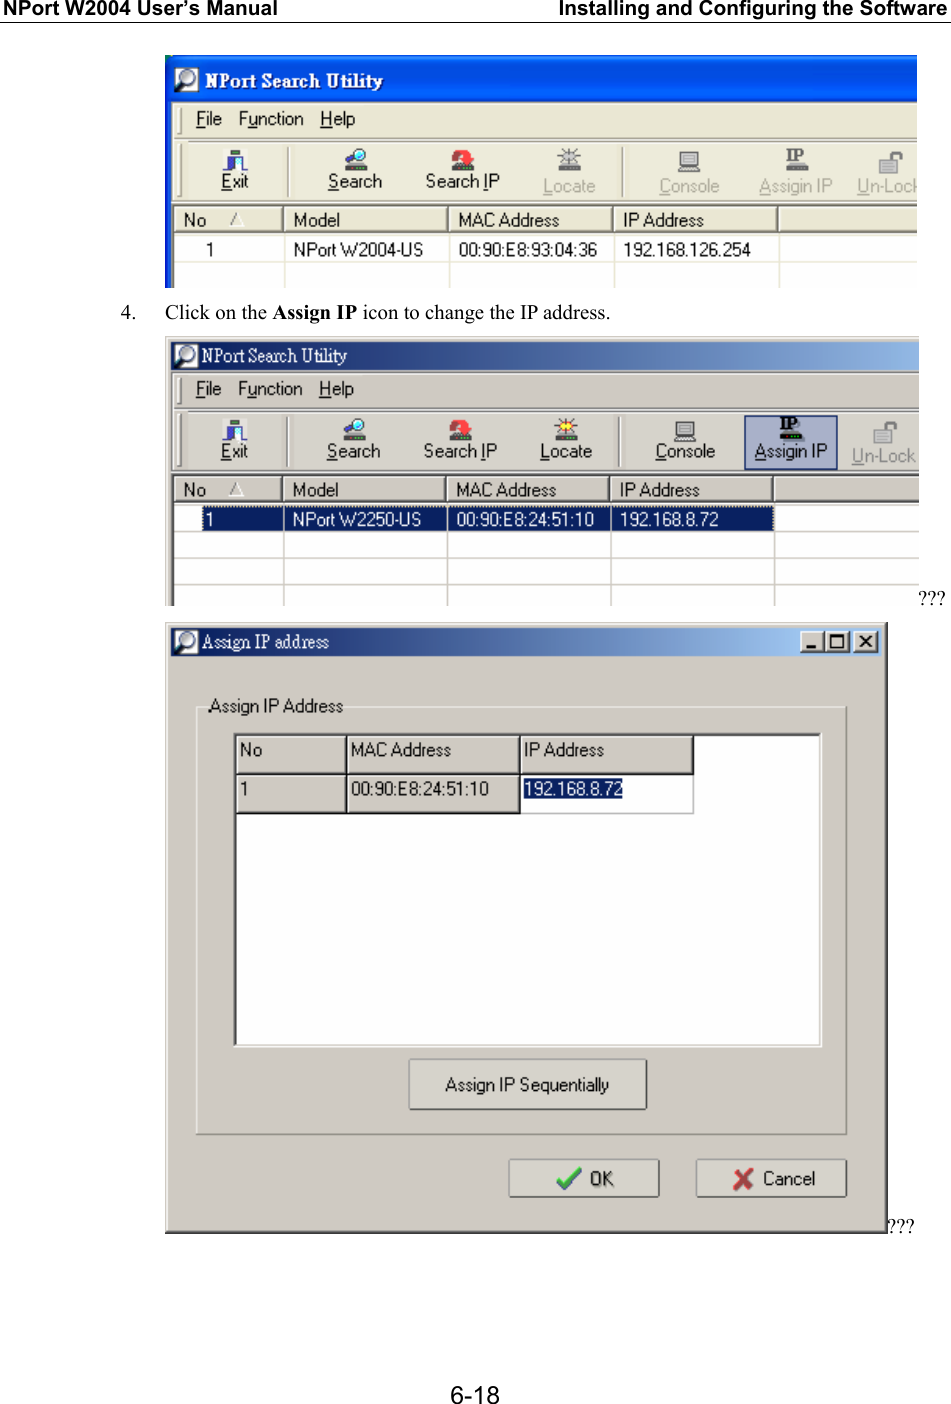 NPort W2004 User’s Manual  Installing and Configuring the Software  6-18 4. Click on the Assign IP icon to change the IP address. ??? ???  